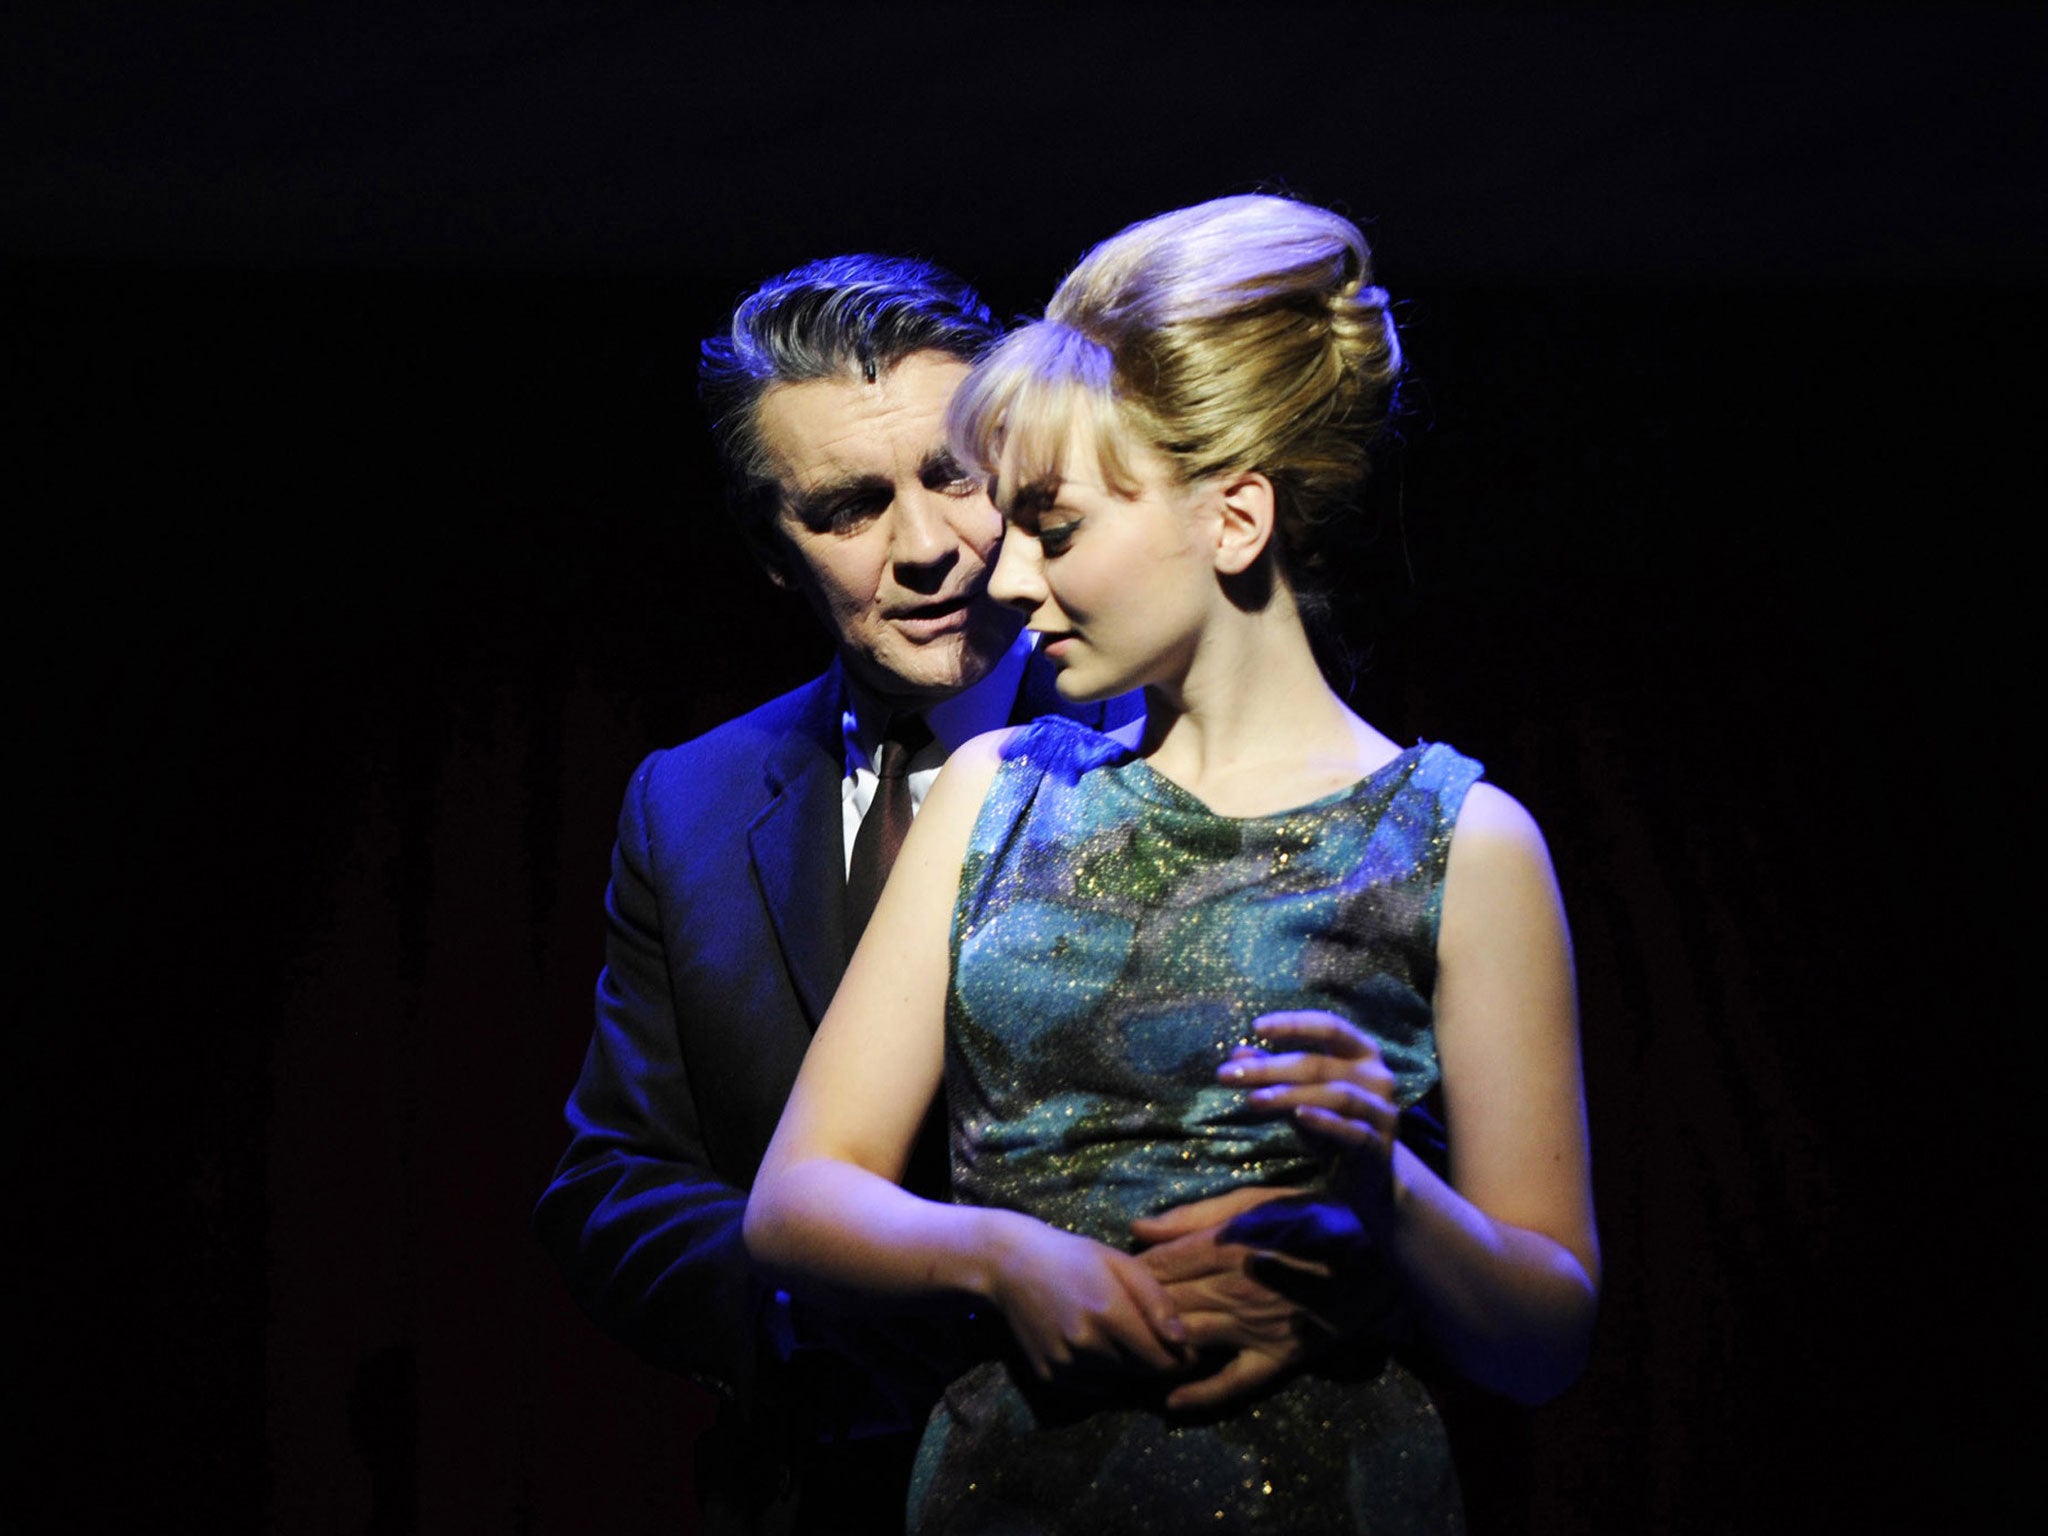 Alexander Hanson, here with Charlotte Blackledge as Mandy Rice-Davies, plays the title role in 'Stephen Ward'